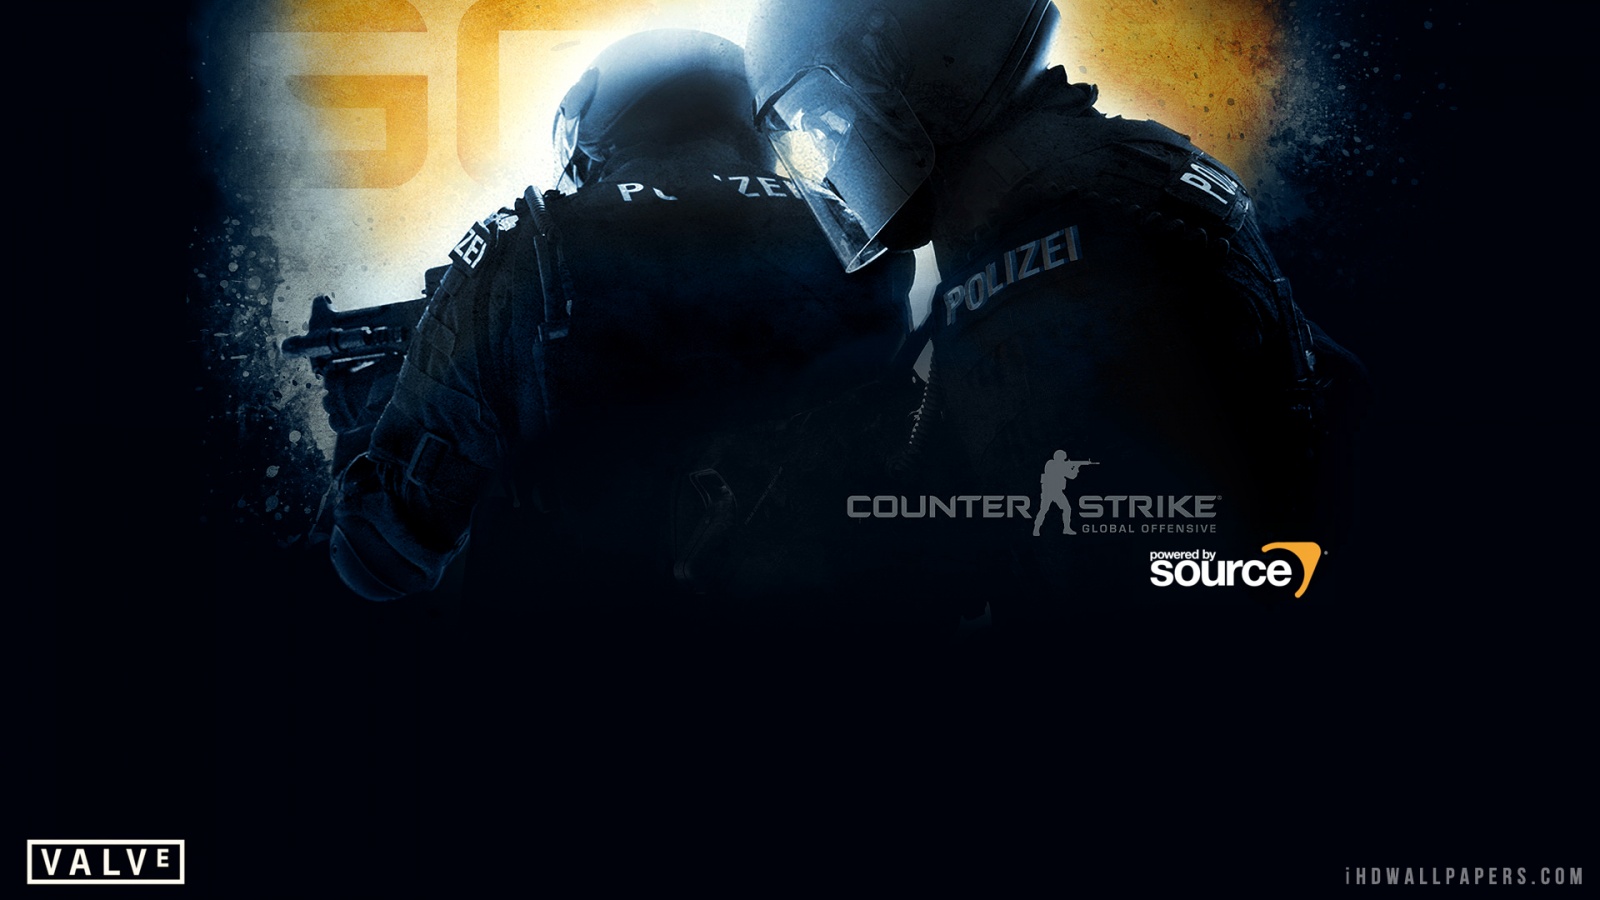 Wallpapers Counter Strike Source 1280 X 800 98 Kb Jpeg HD Wallpapers